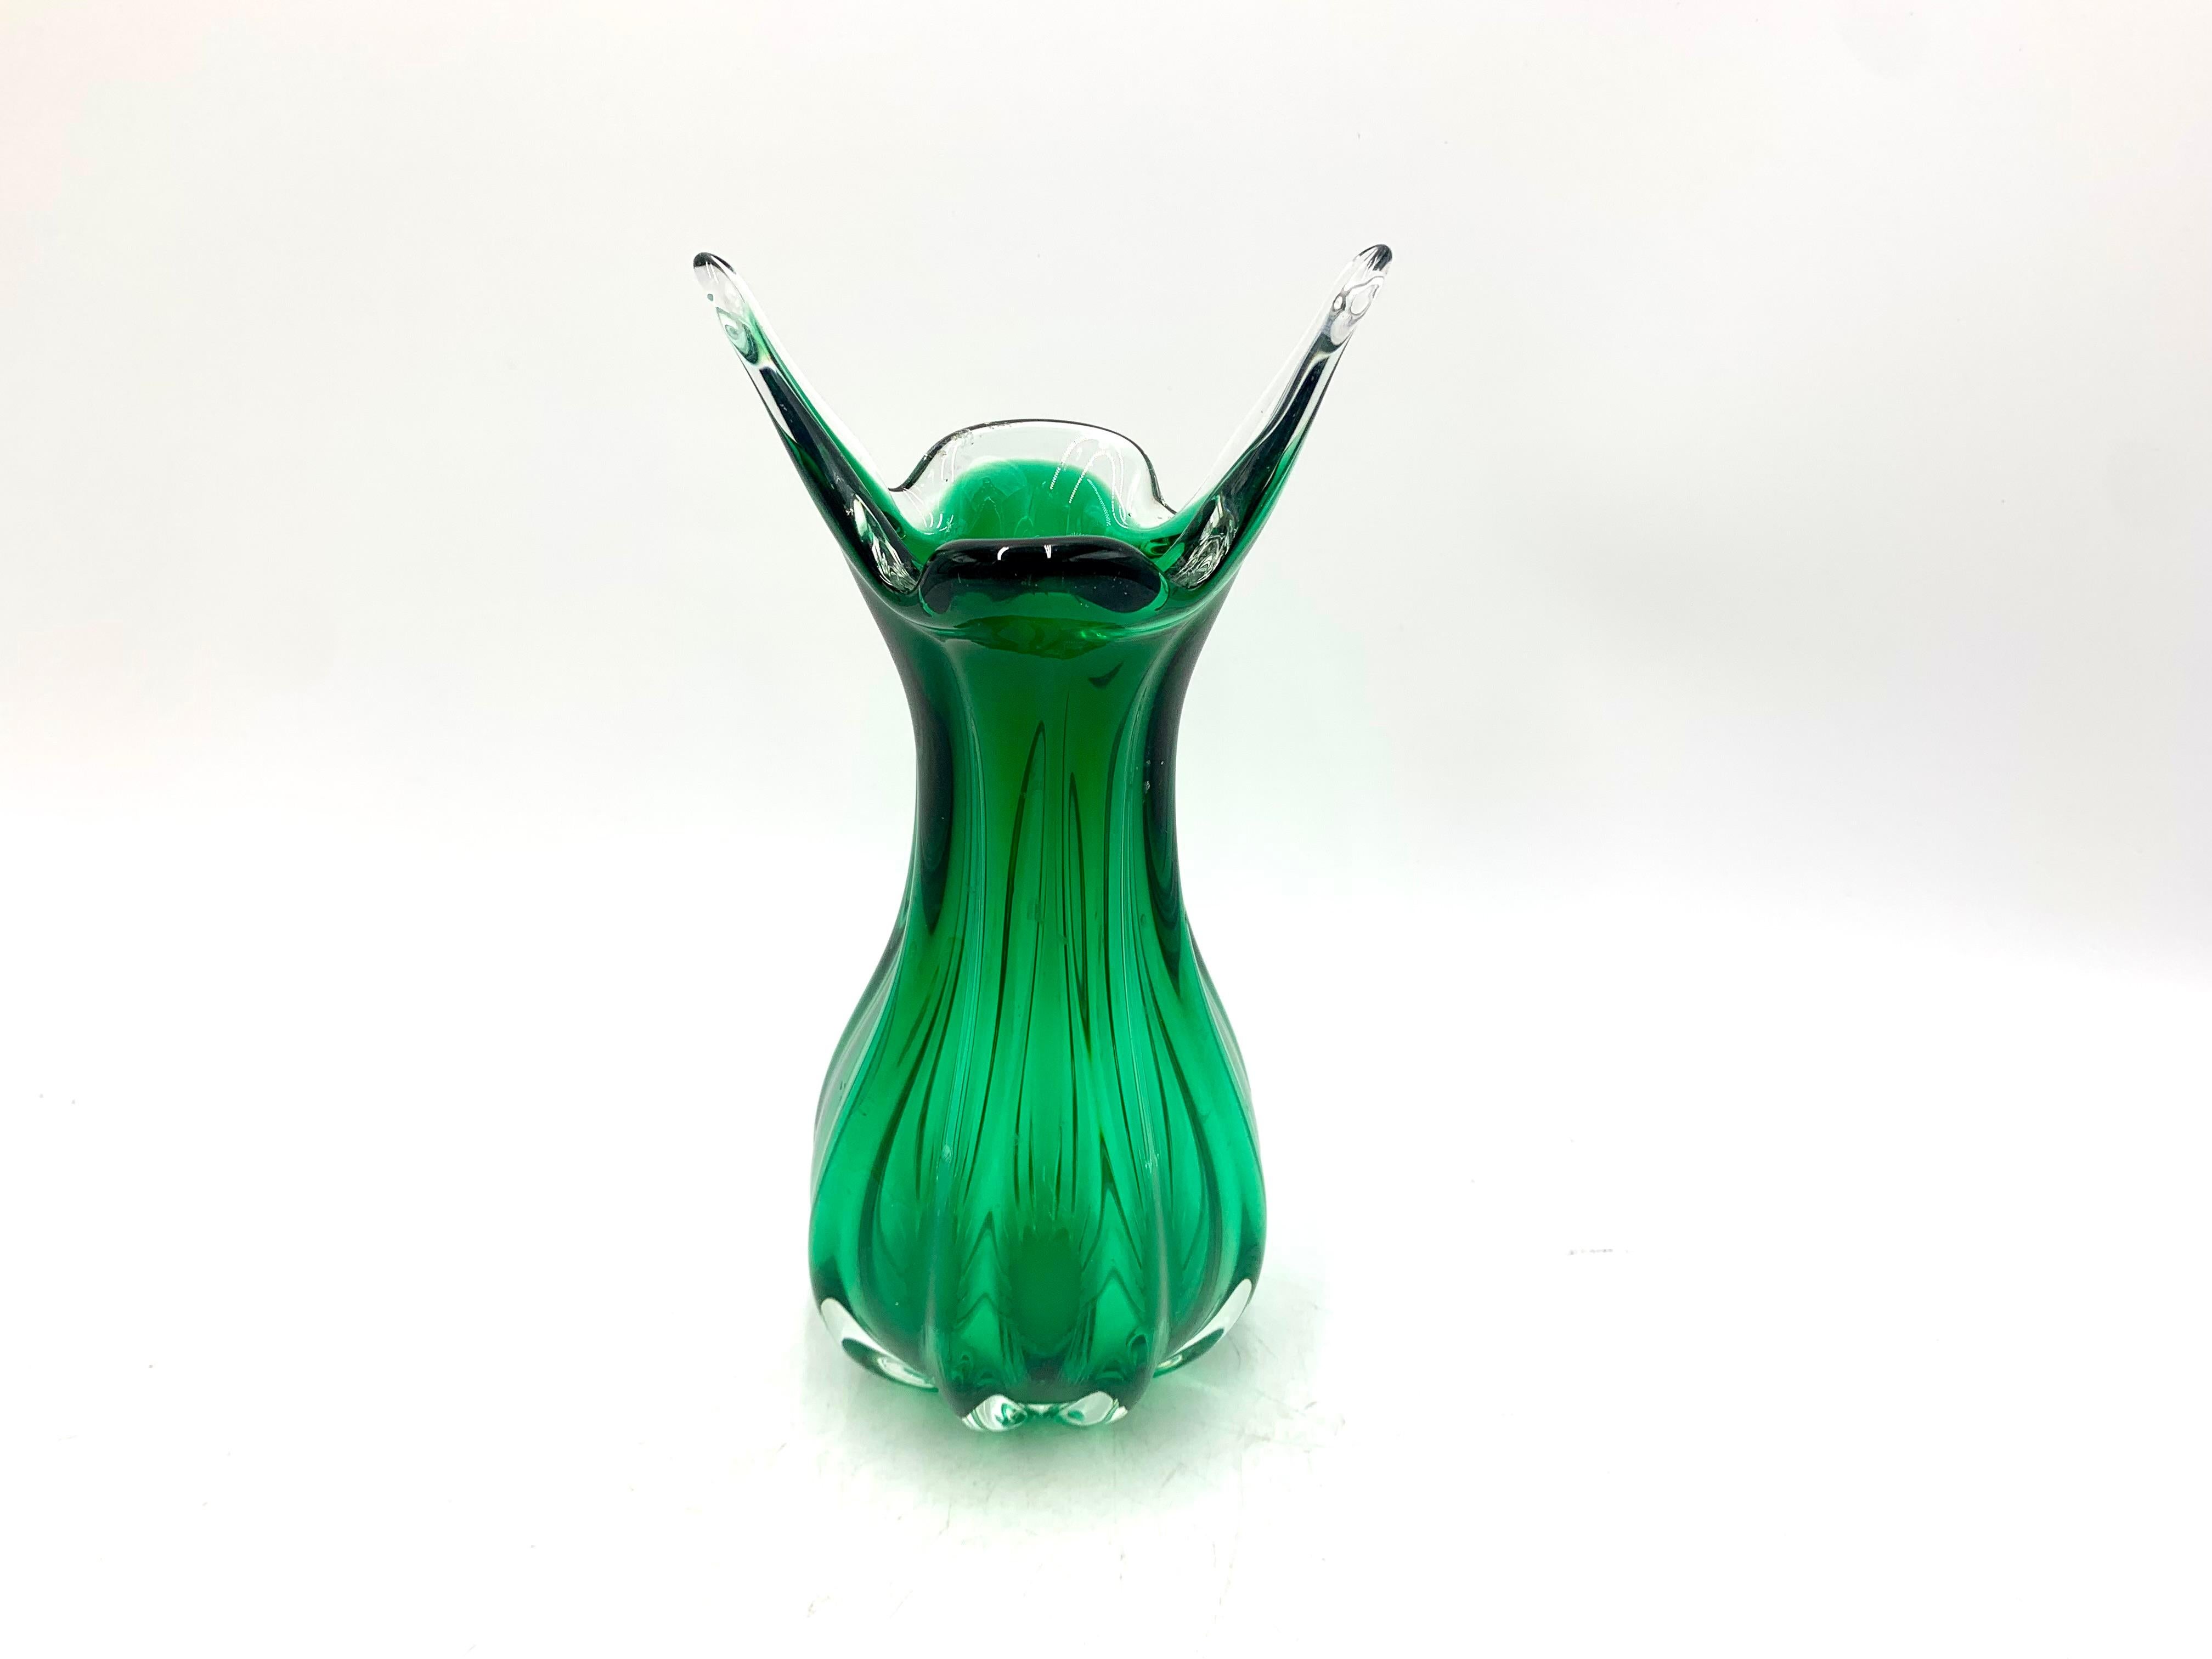 A green vase produced in the Czech Republic, probably by Egermann Steelworks in the 1970s. Very good condition without damage.

Measures: height 23cm
diameter 9cm.

